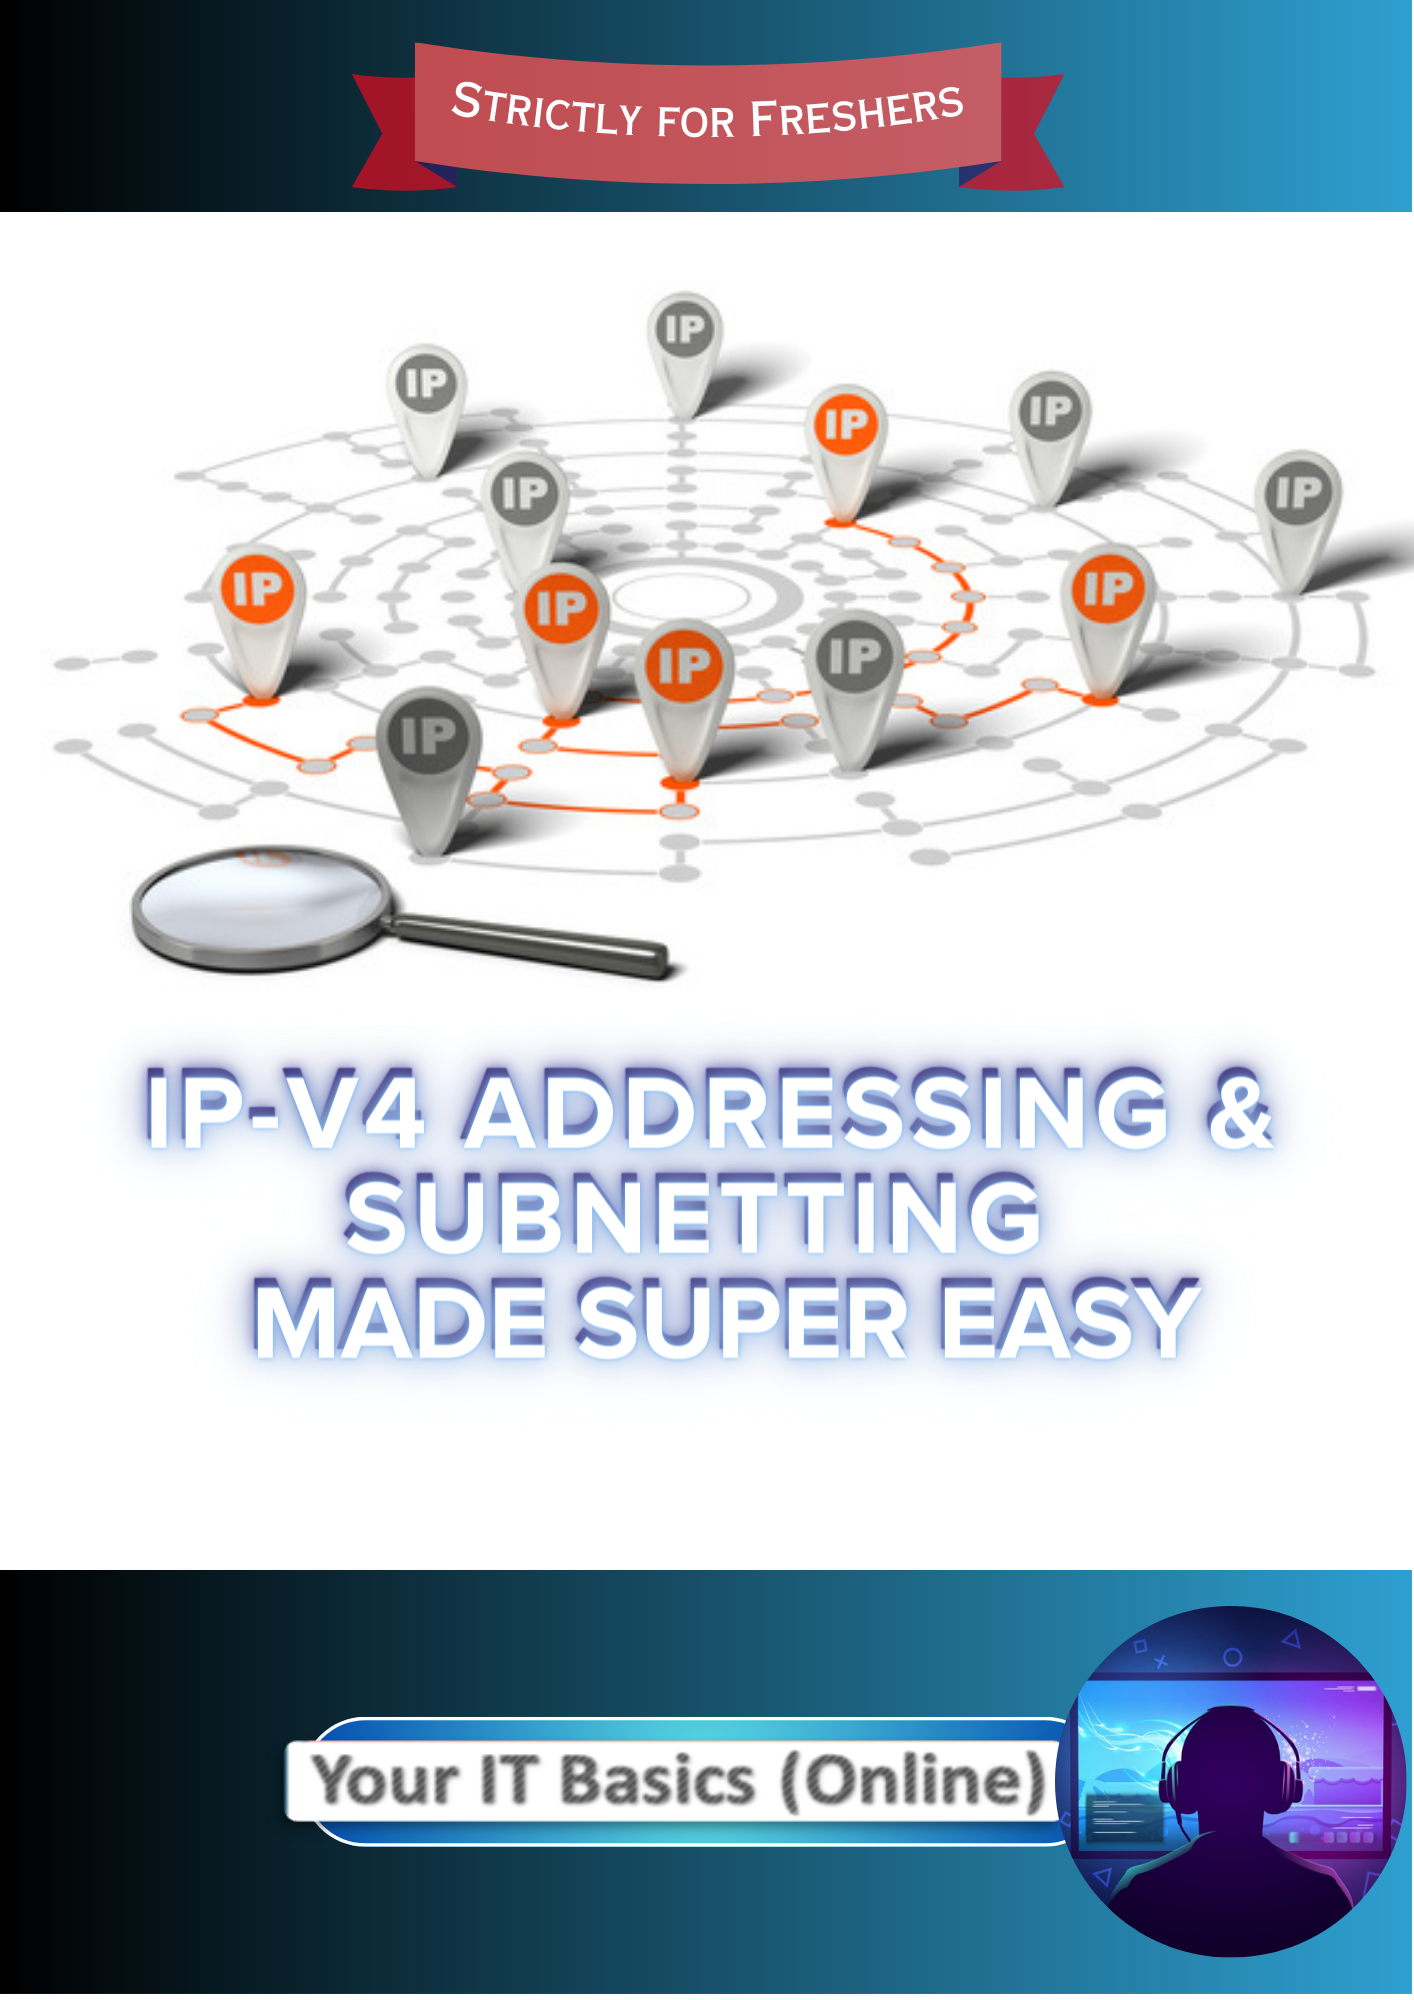 IPv4 and Subnetting Made Super Easy